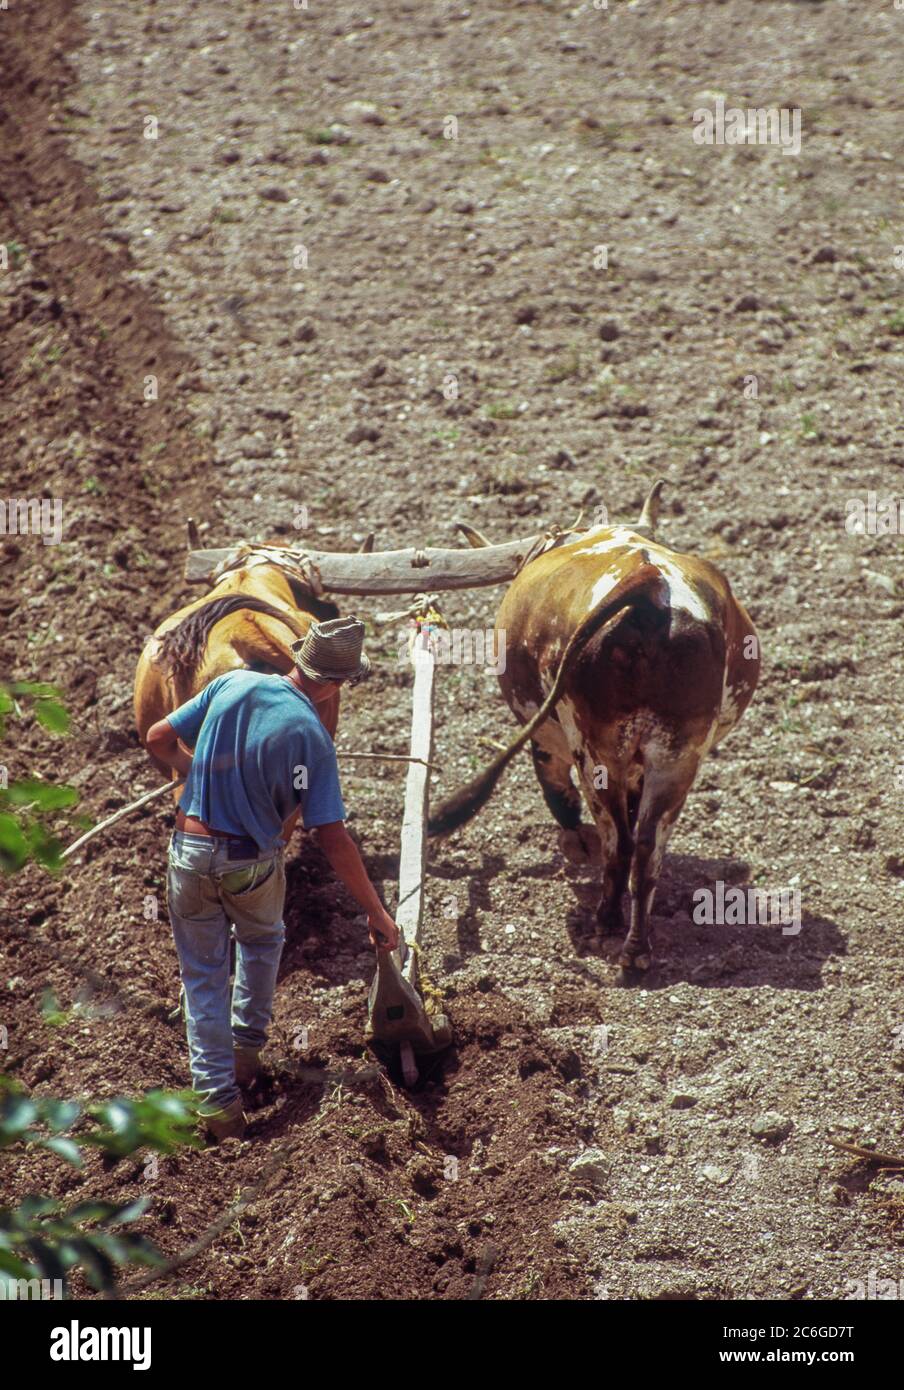 Farmer plowing field with oxes, Merida state, Venezuela Stock Photo